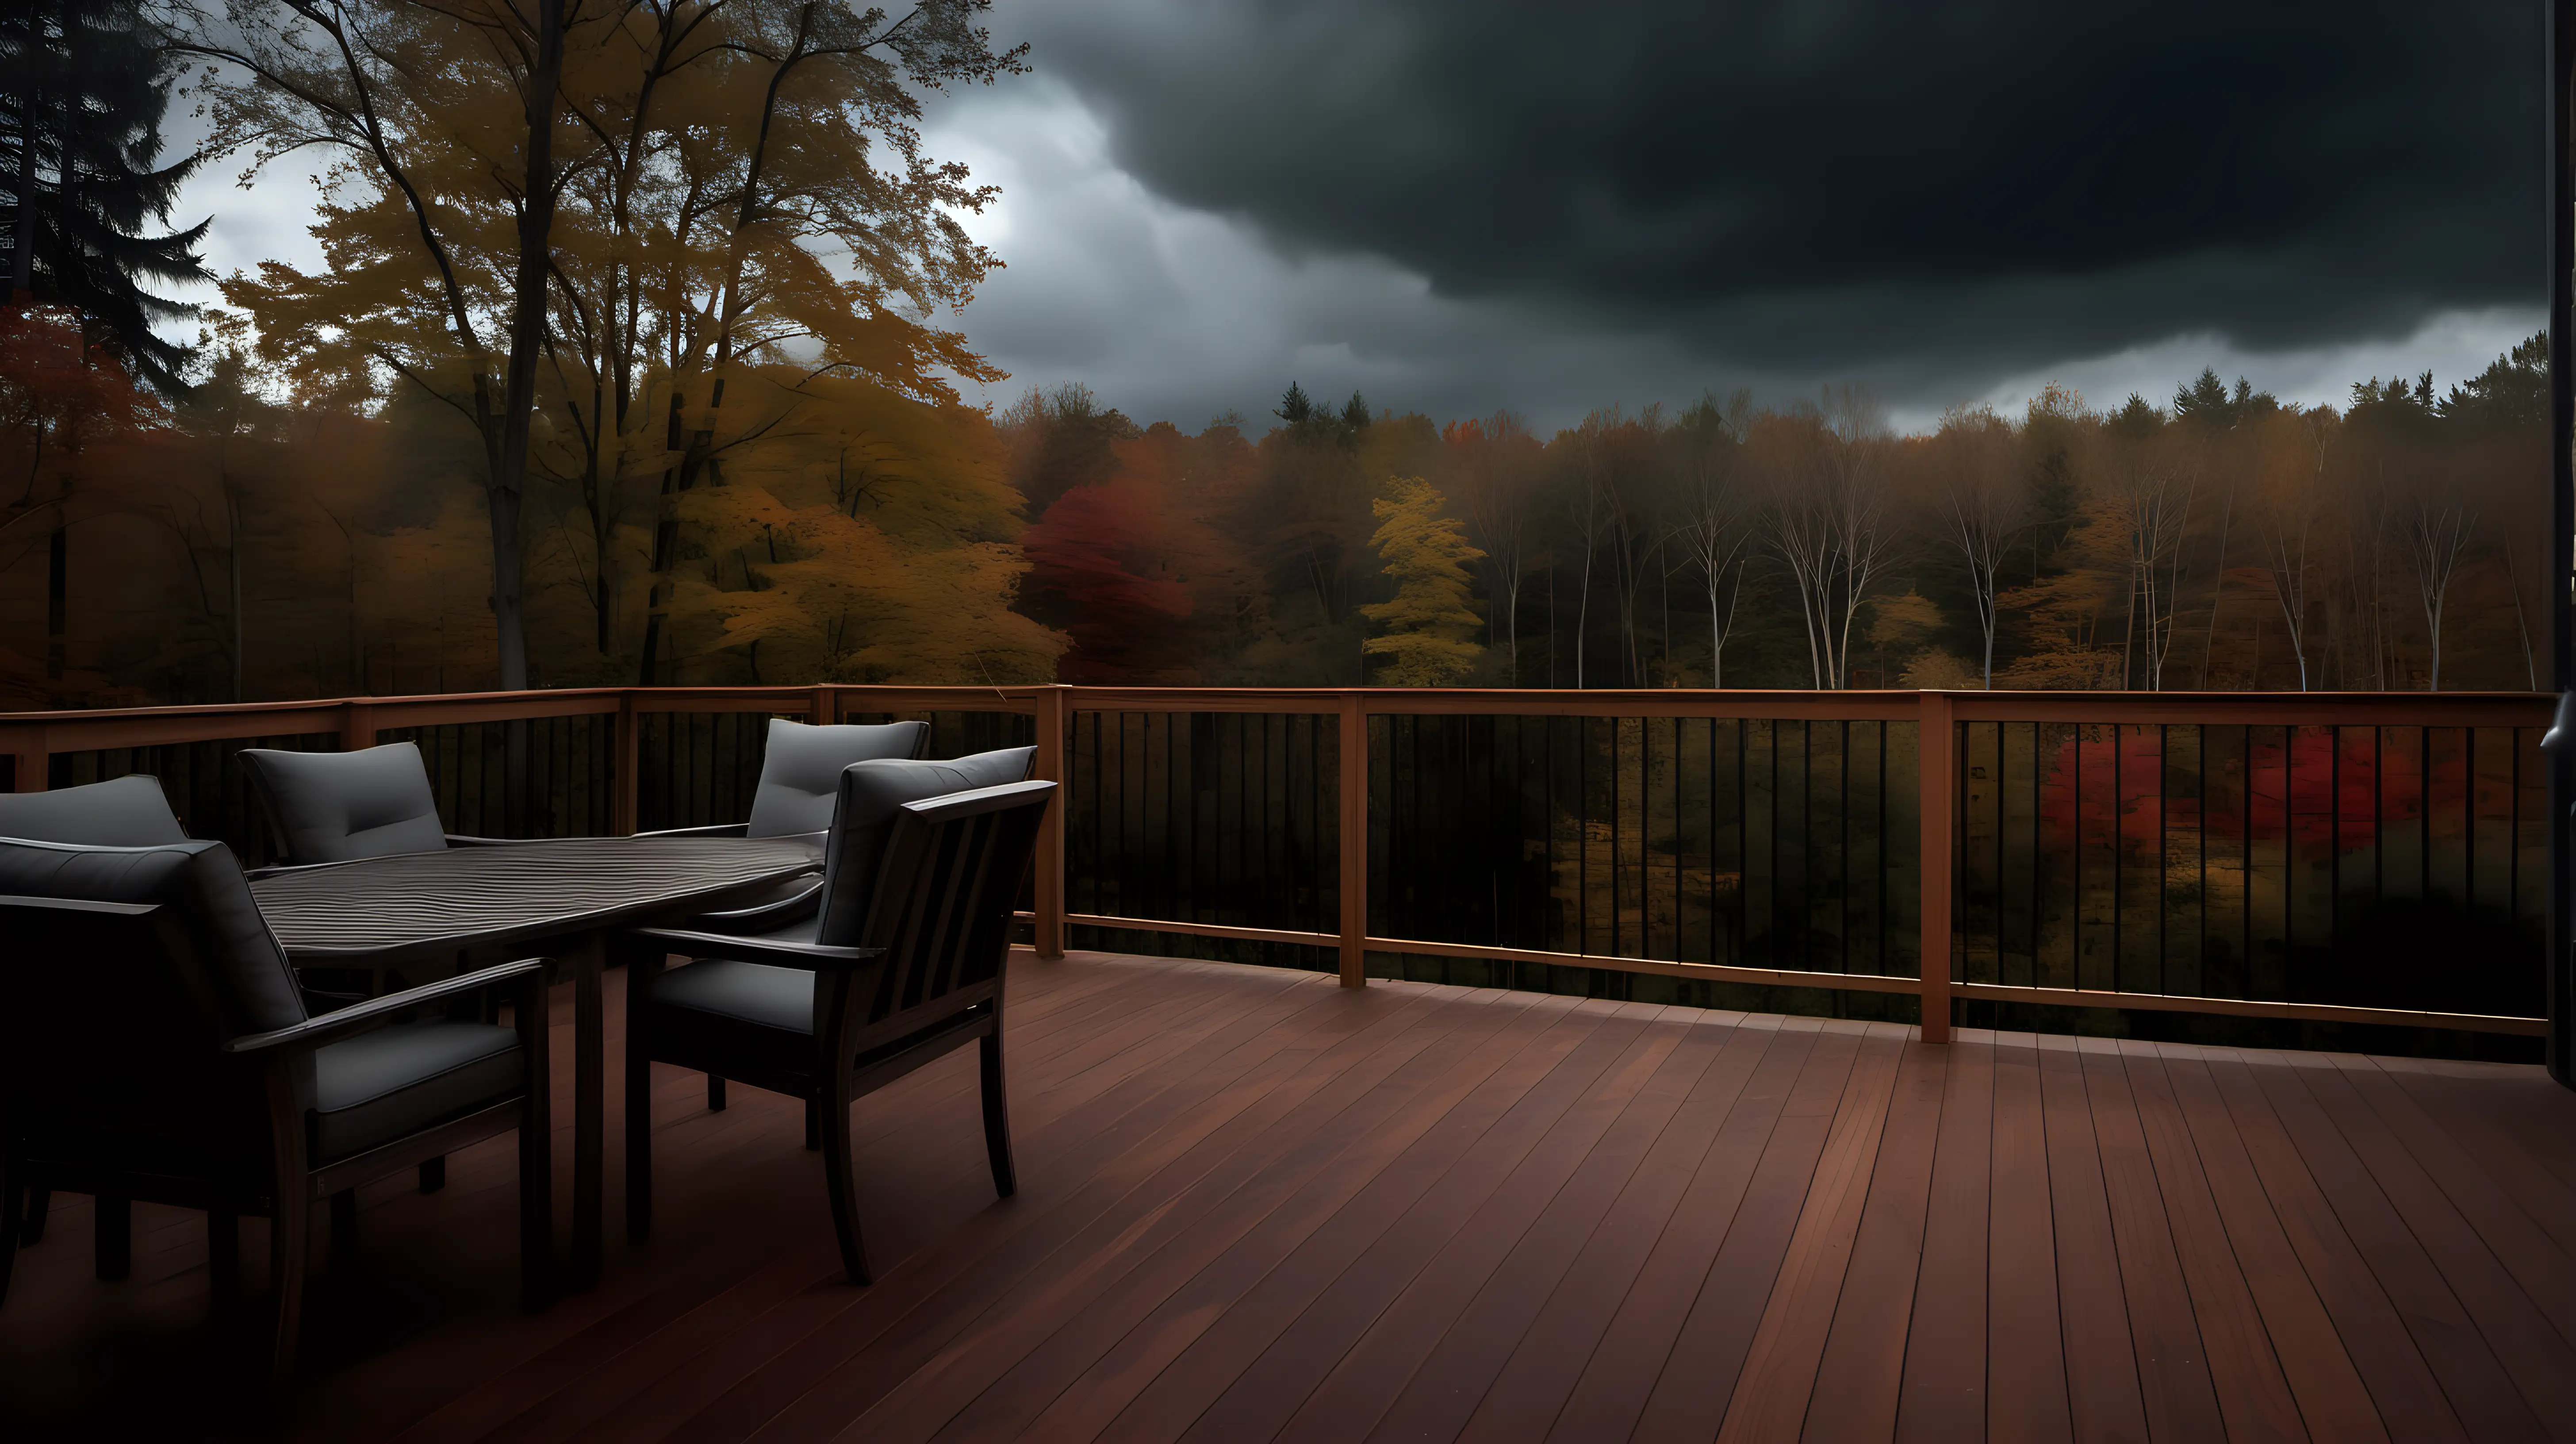 Scenic Autumn Evening on a Wooden Deck with Forest View